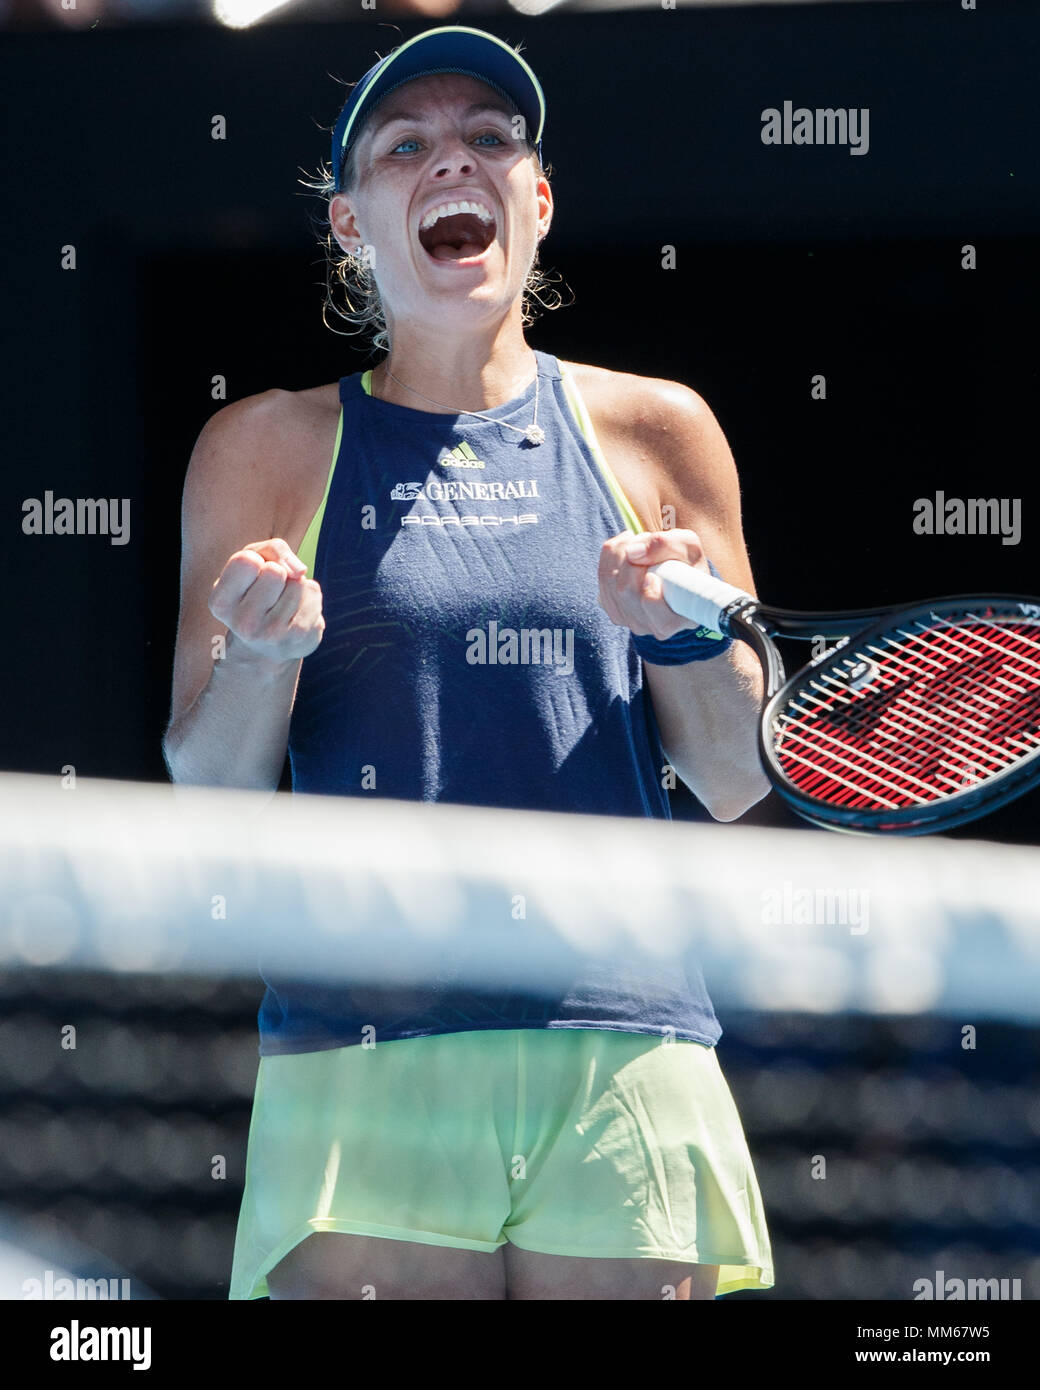 kasket stewardesse Ulydighed German tennis player Angelique Kerber making a fist and cheering during women's  singles match in Australian Open 2018 Tennis Tournament, Melbourne Par  Stock Photo - Alamy